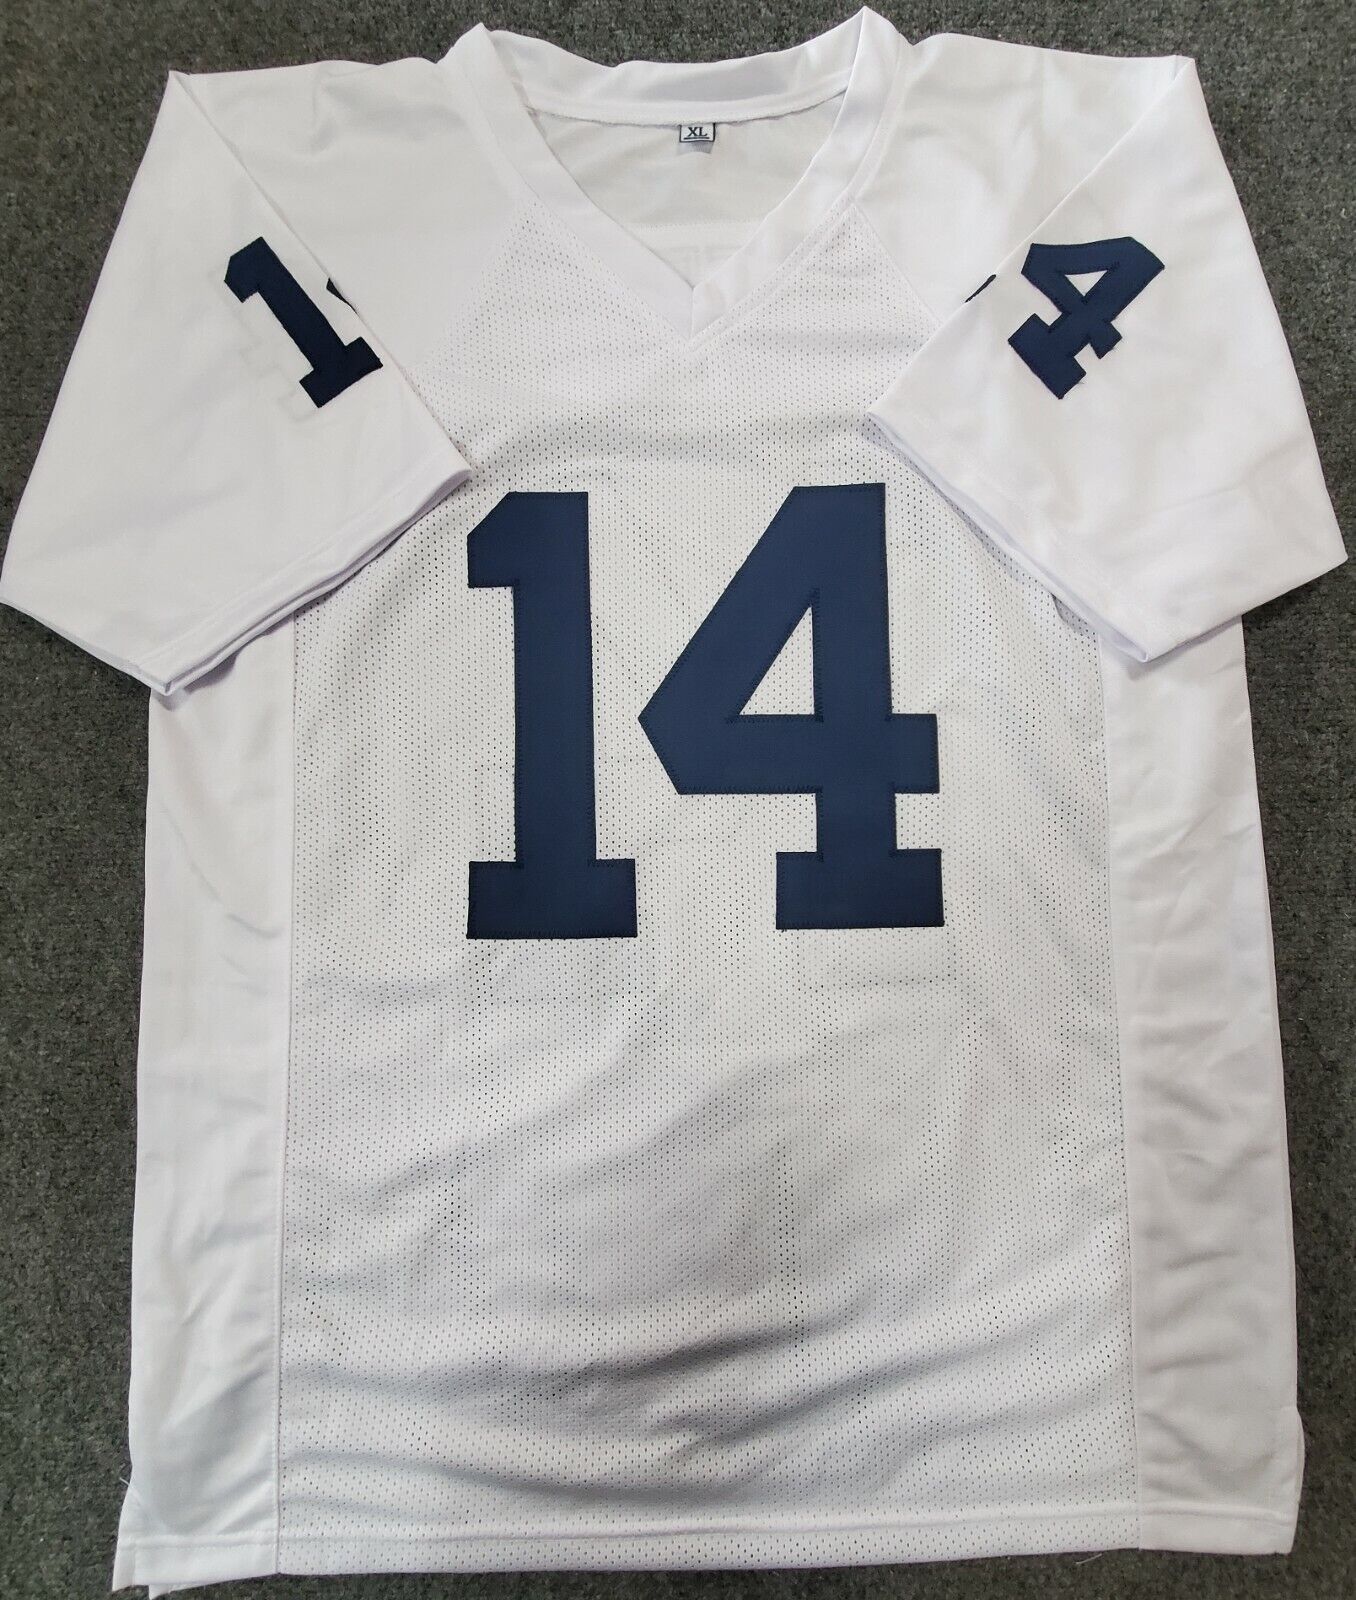 MVP Authentics Penn State Sean Clifford Autographed Signed Inscribed Jersey Jsa Coa 116.10 sports jersey framing , jersey framing